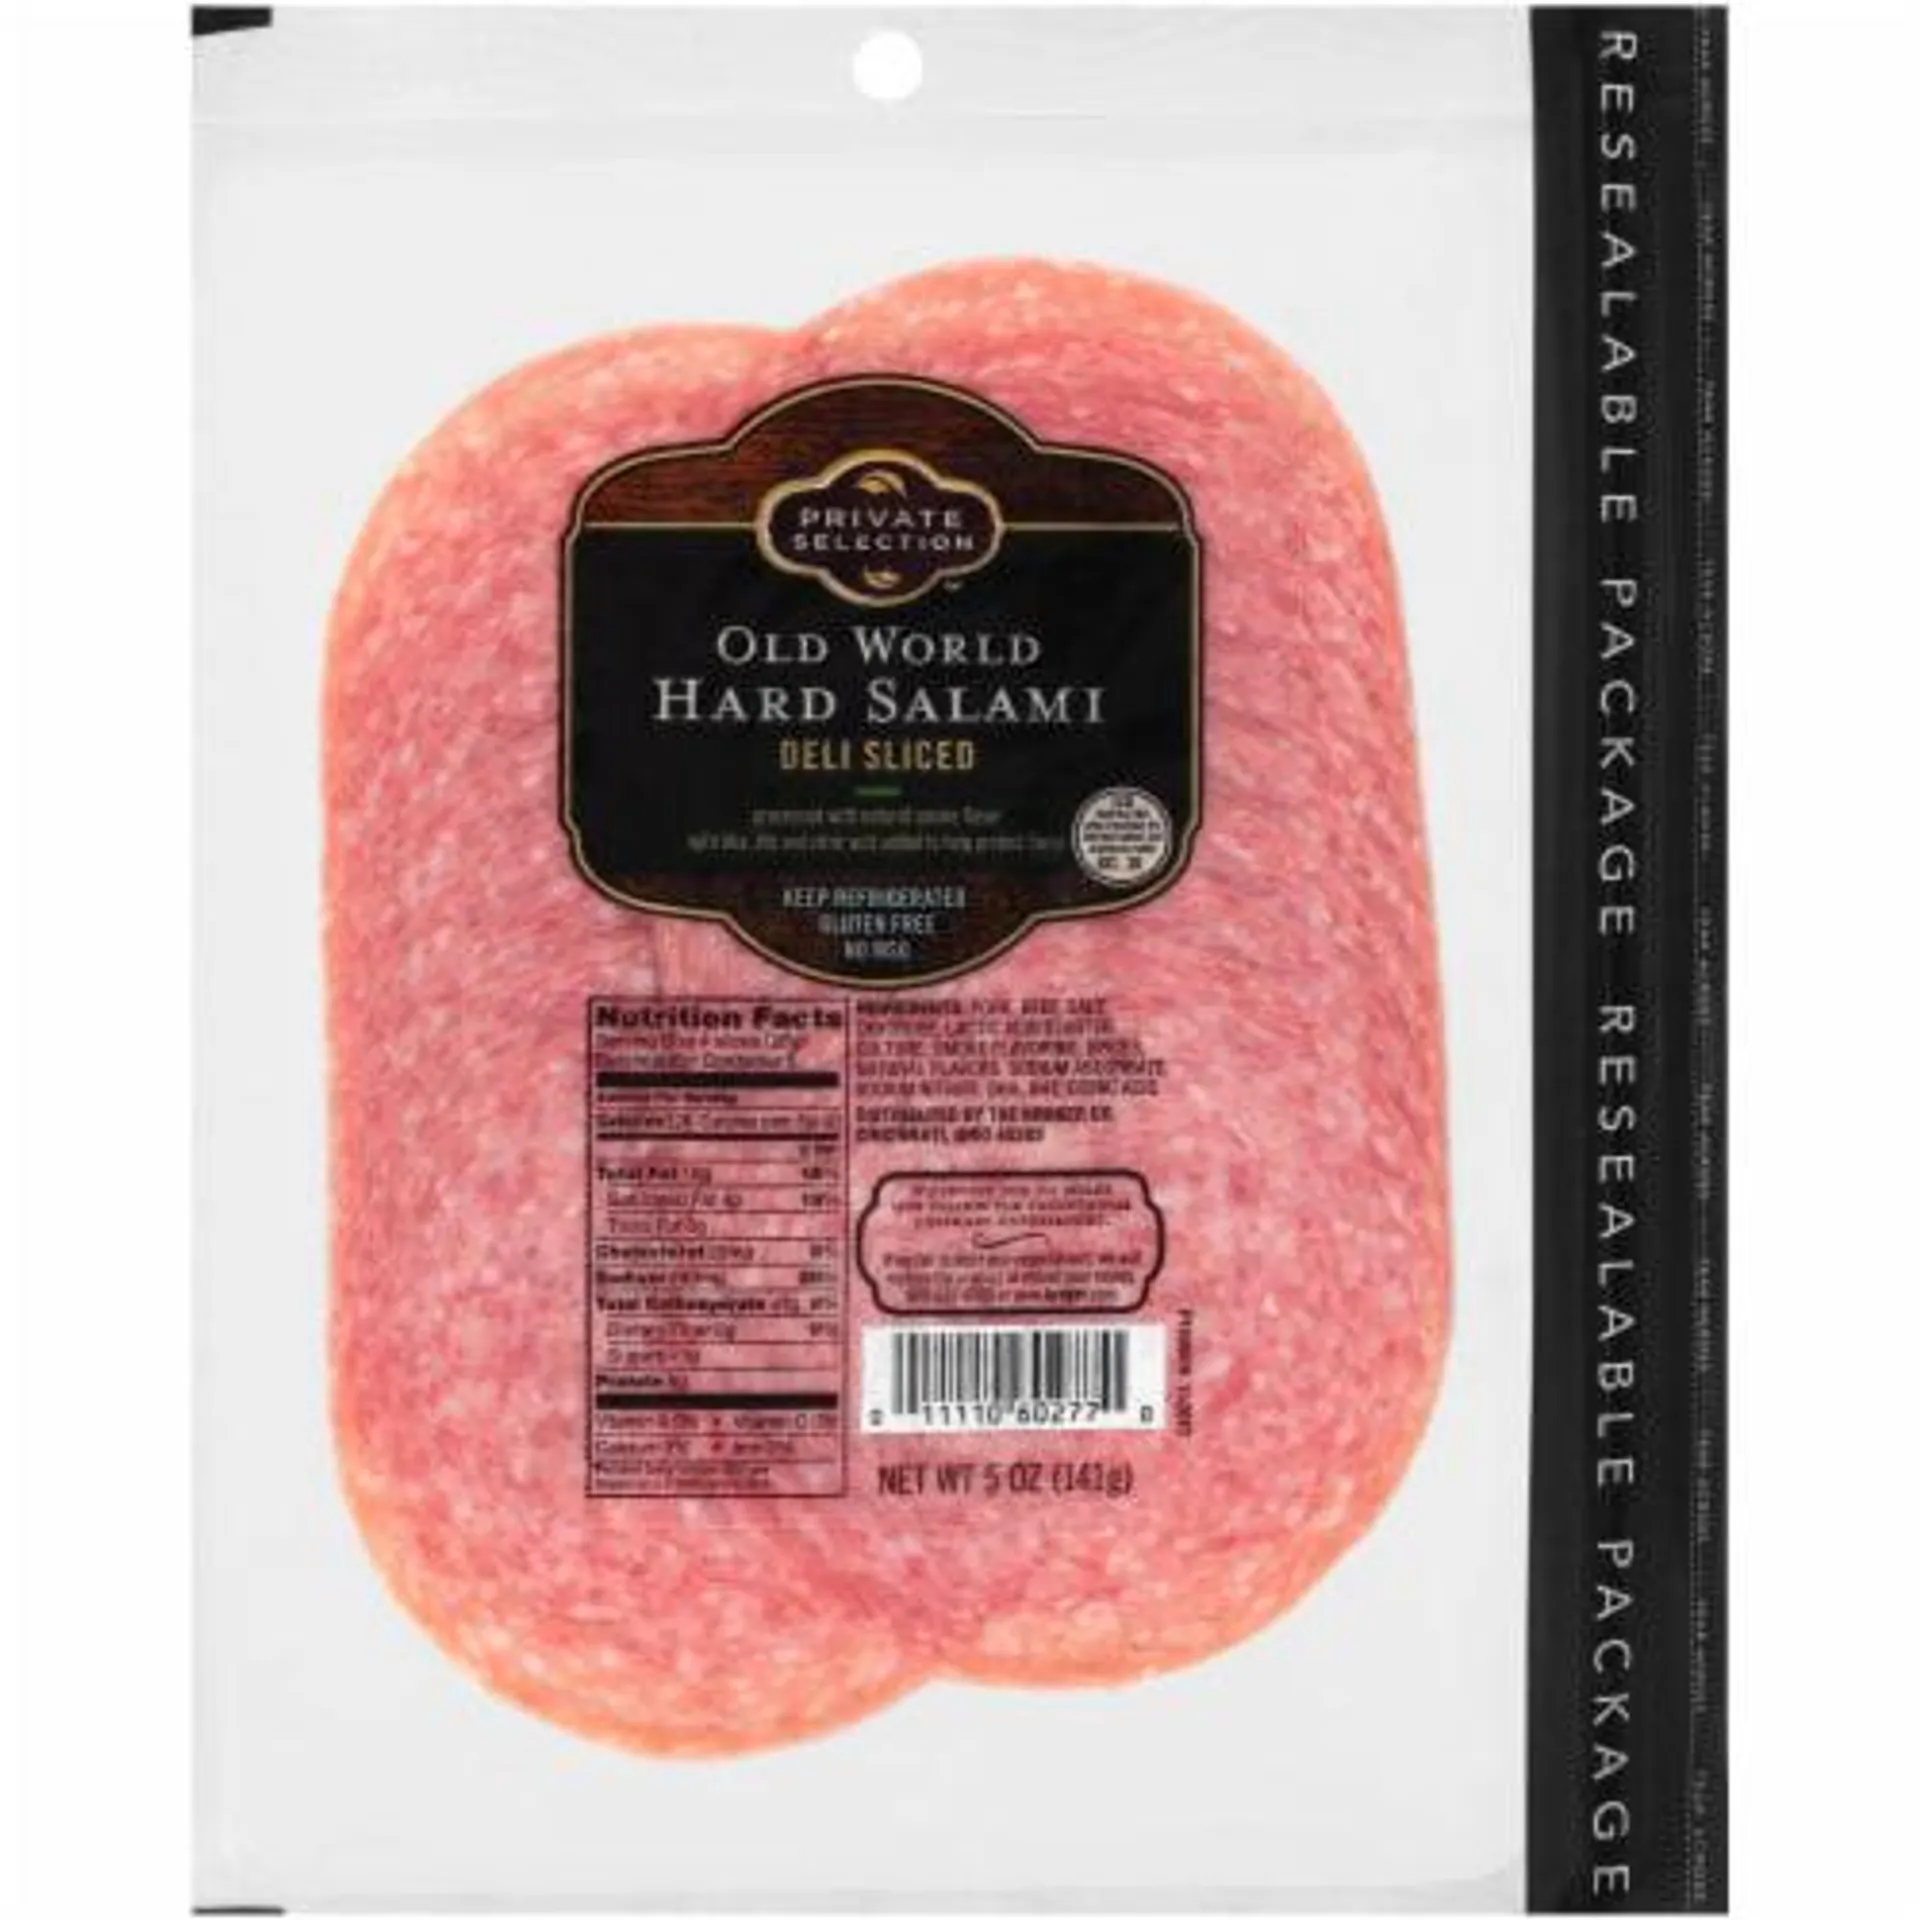 Private Selection Old World Hard Salami